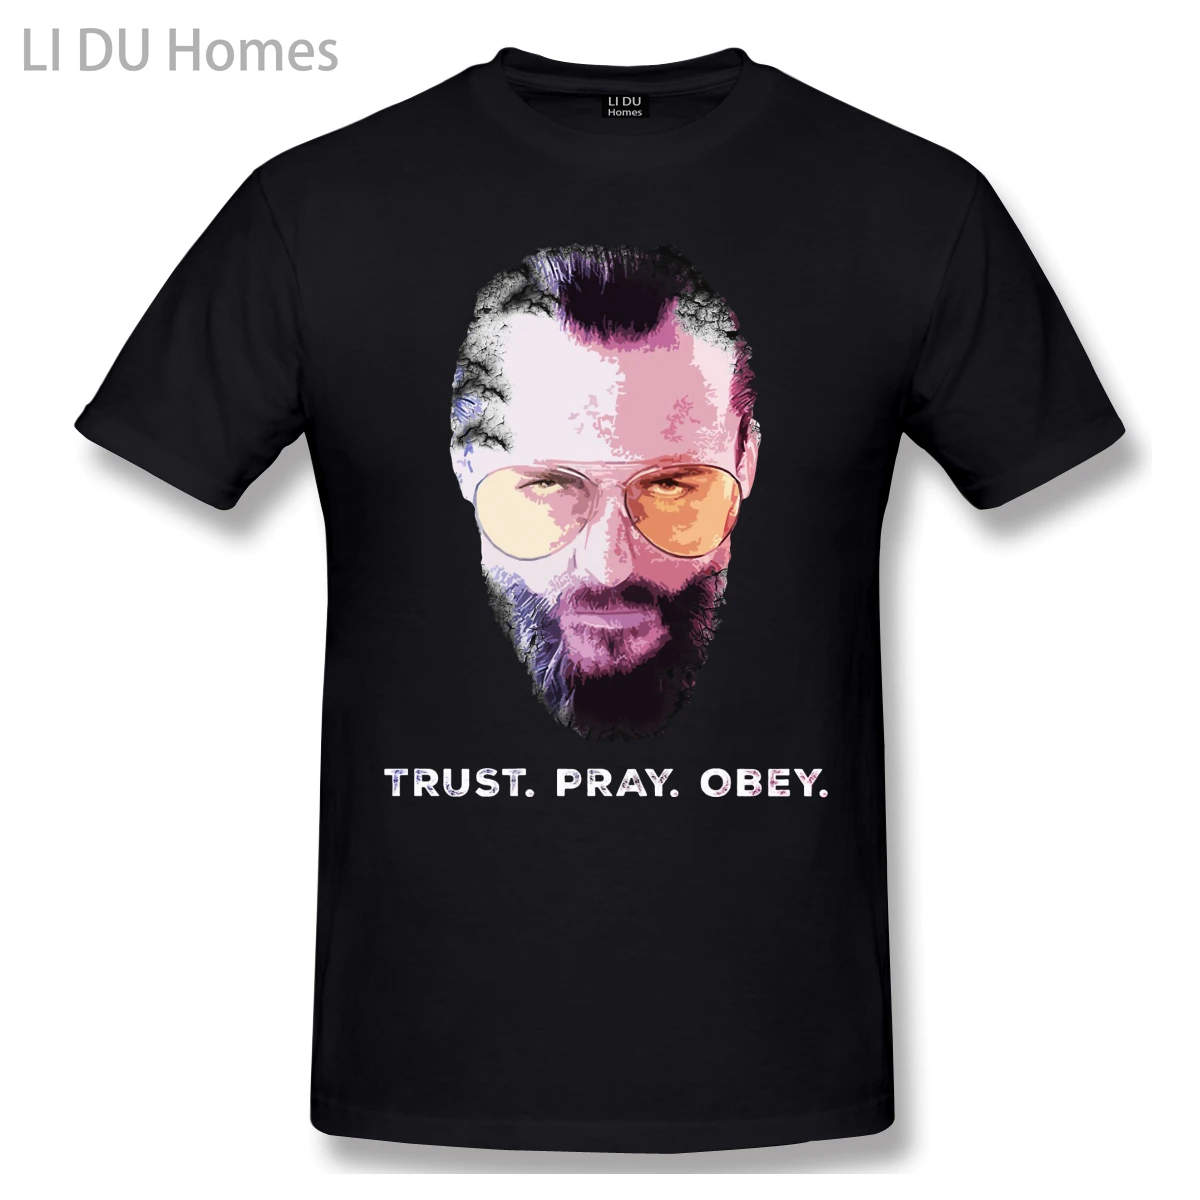 

LIDU The Father - Trust. Pray. Obey. - Far Cry 5 Casual T Shirt Hot Sale Far Cry Tee Shirt 100% Cotton O Neck T-shirts